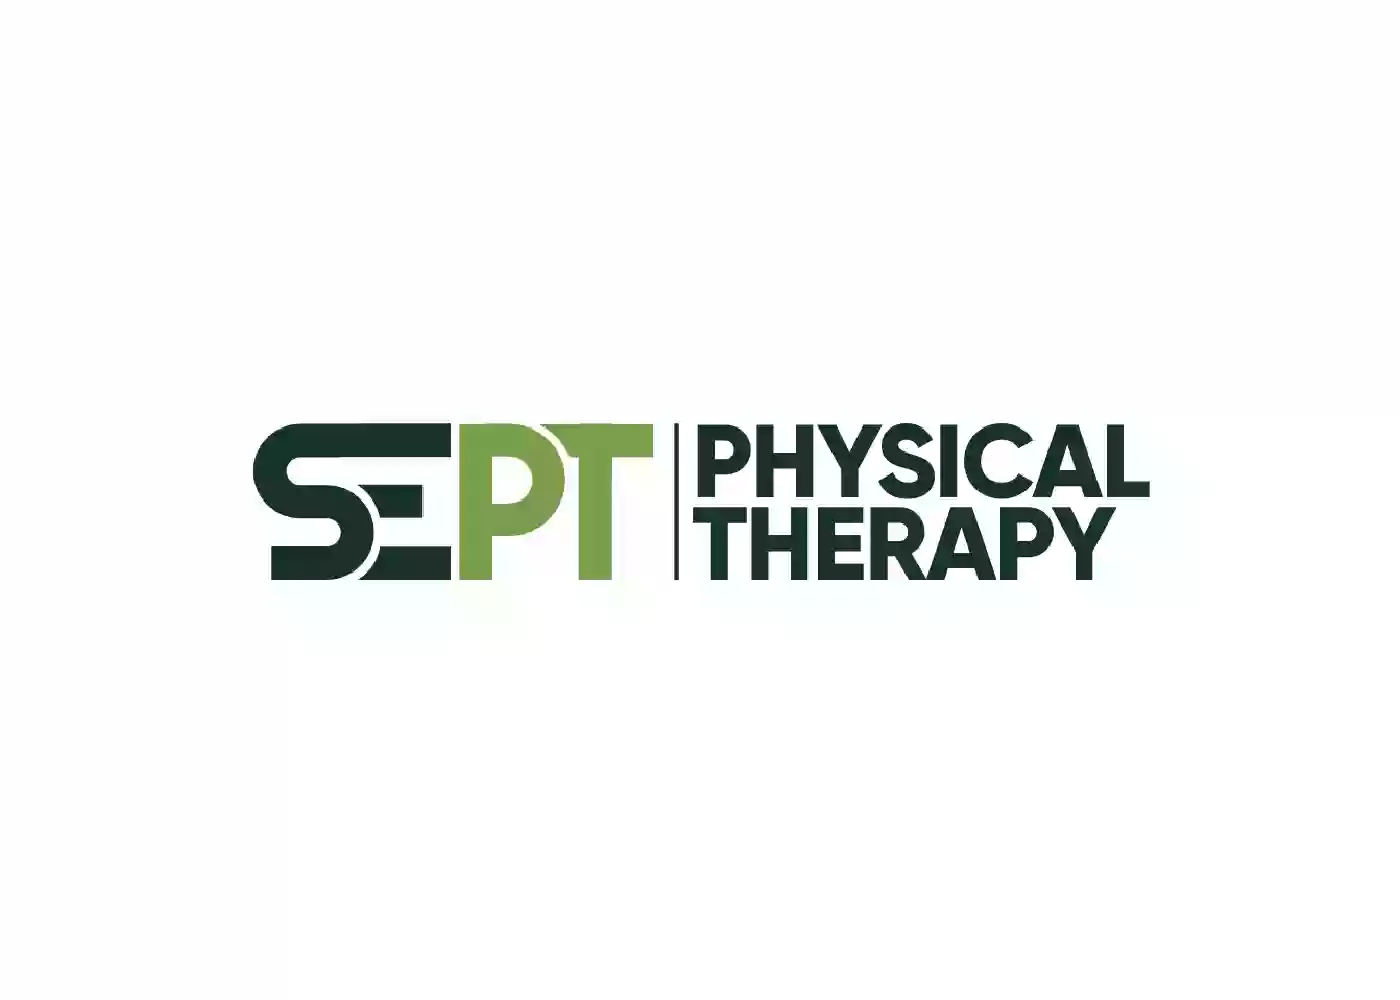 SEPT Physical Therapy